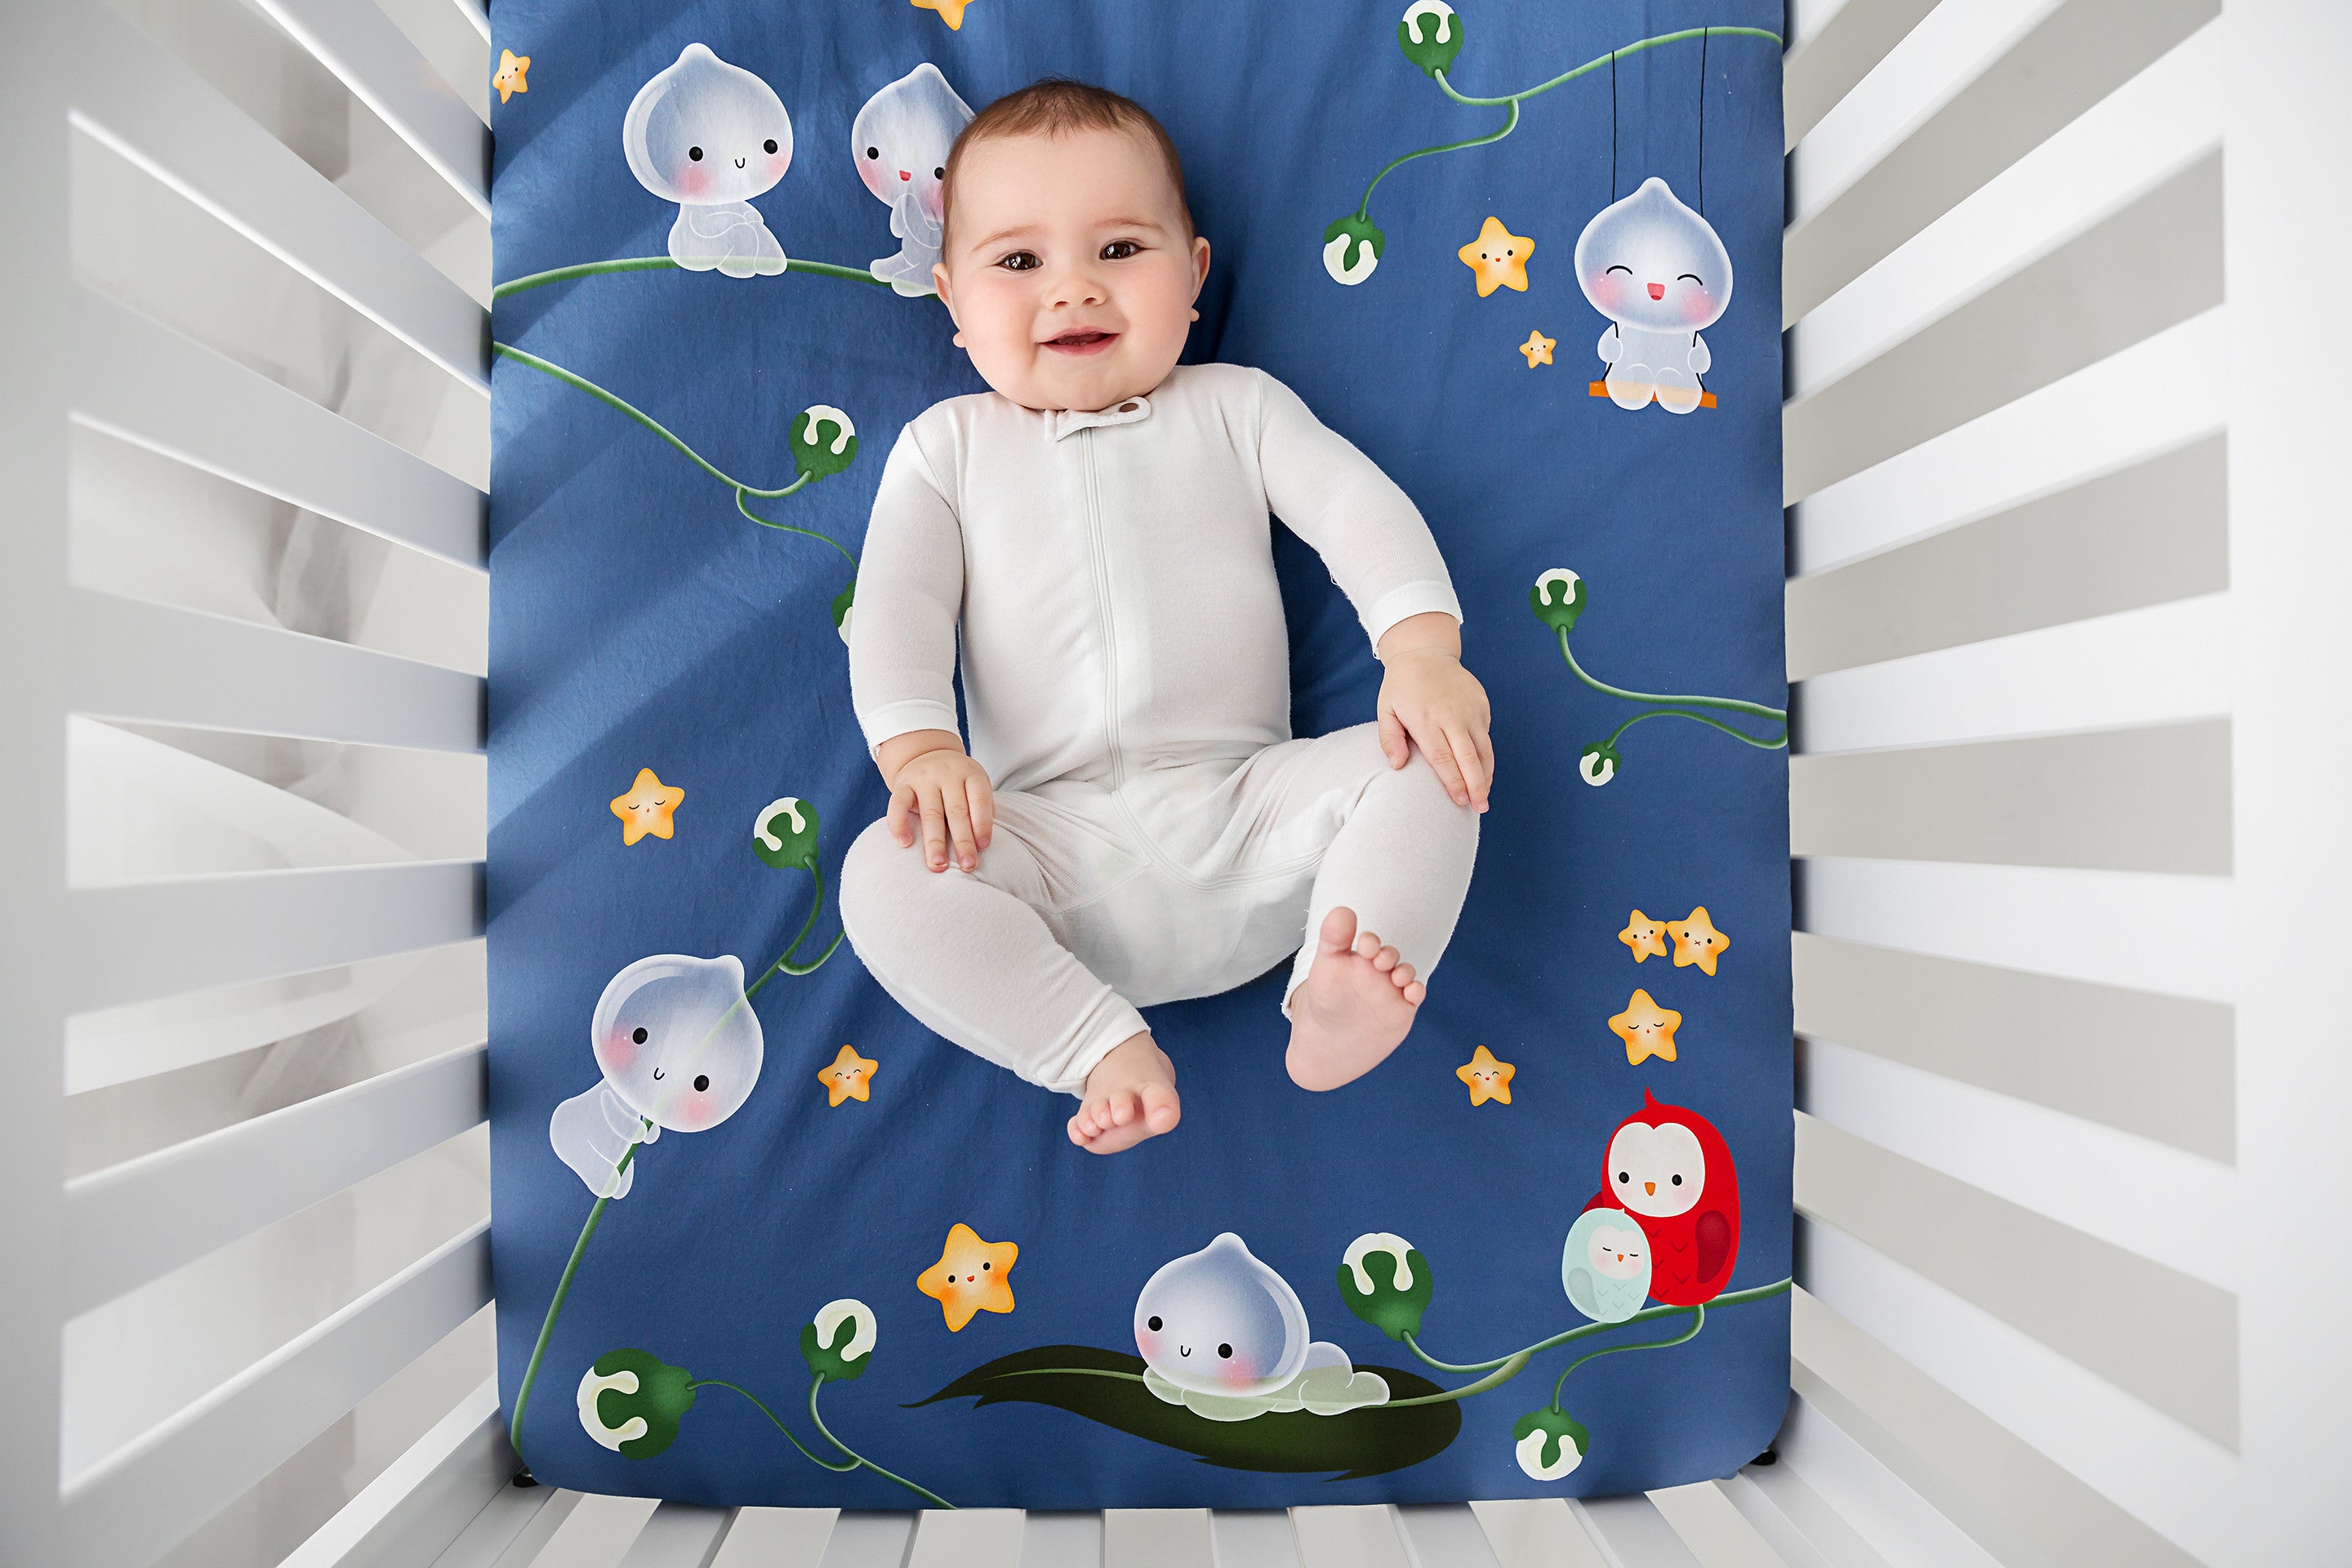 Fitted baby crib sheet by Rookie Humans, Magic Forest. Illustrated by Silvia Portella. Designed for the modern nursery, navy crib sheet.